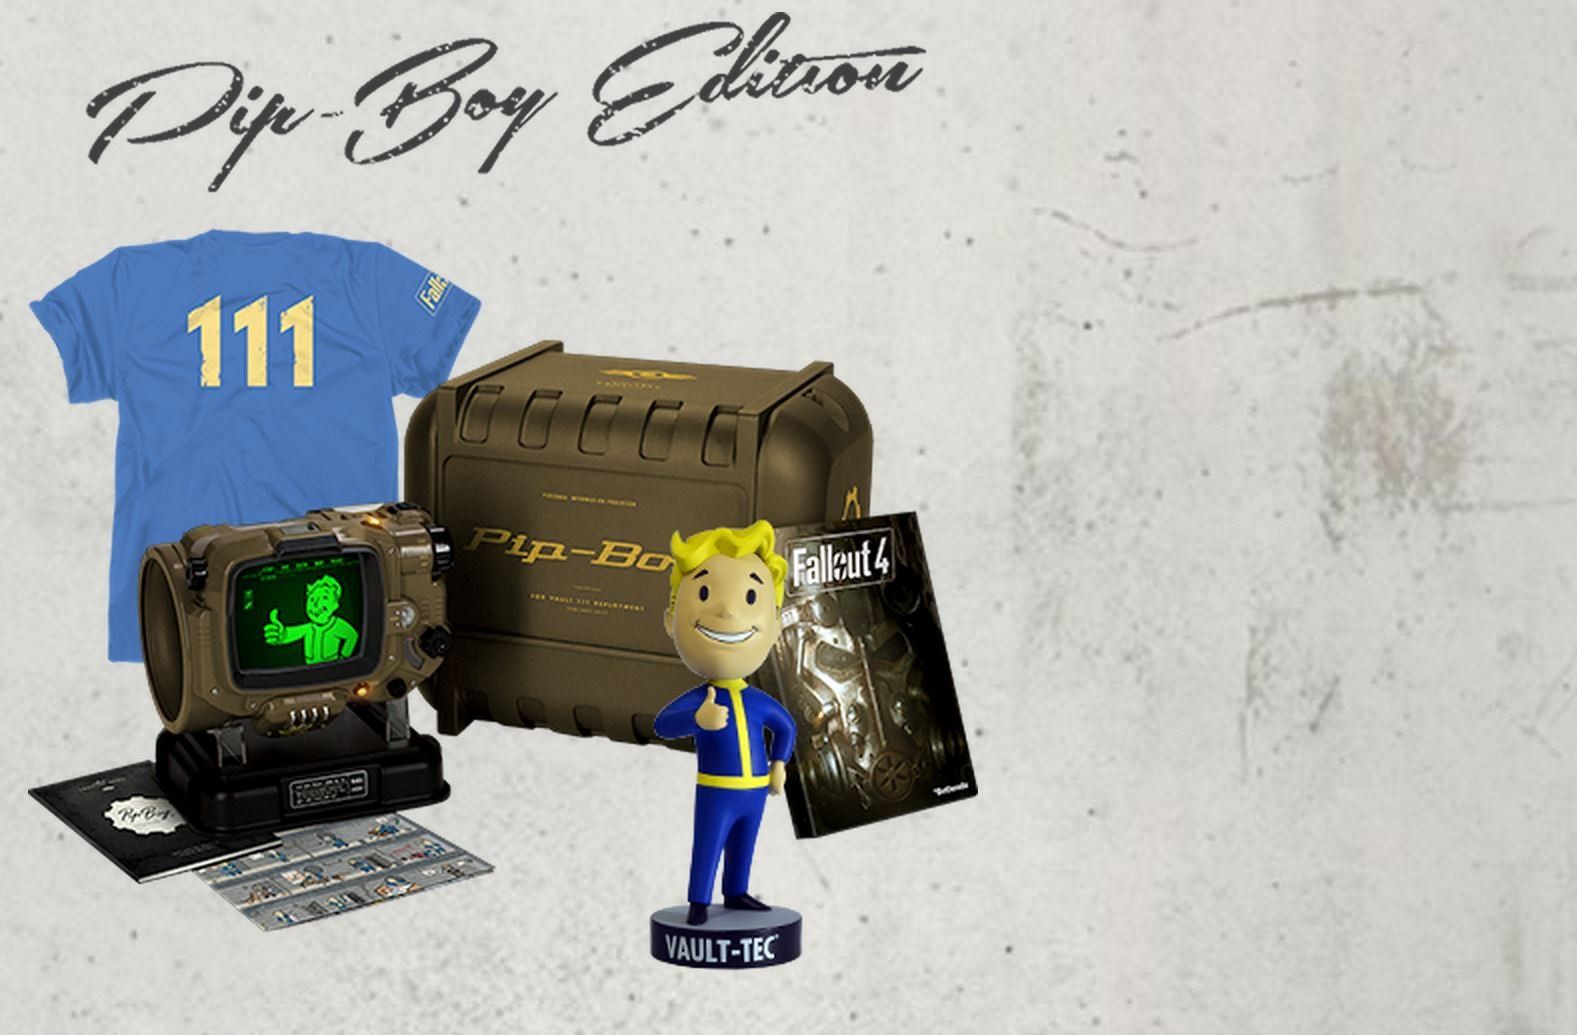 Will there be a special edition fallout 4 фото 1